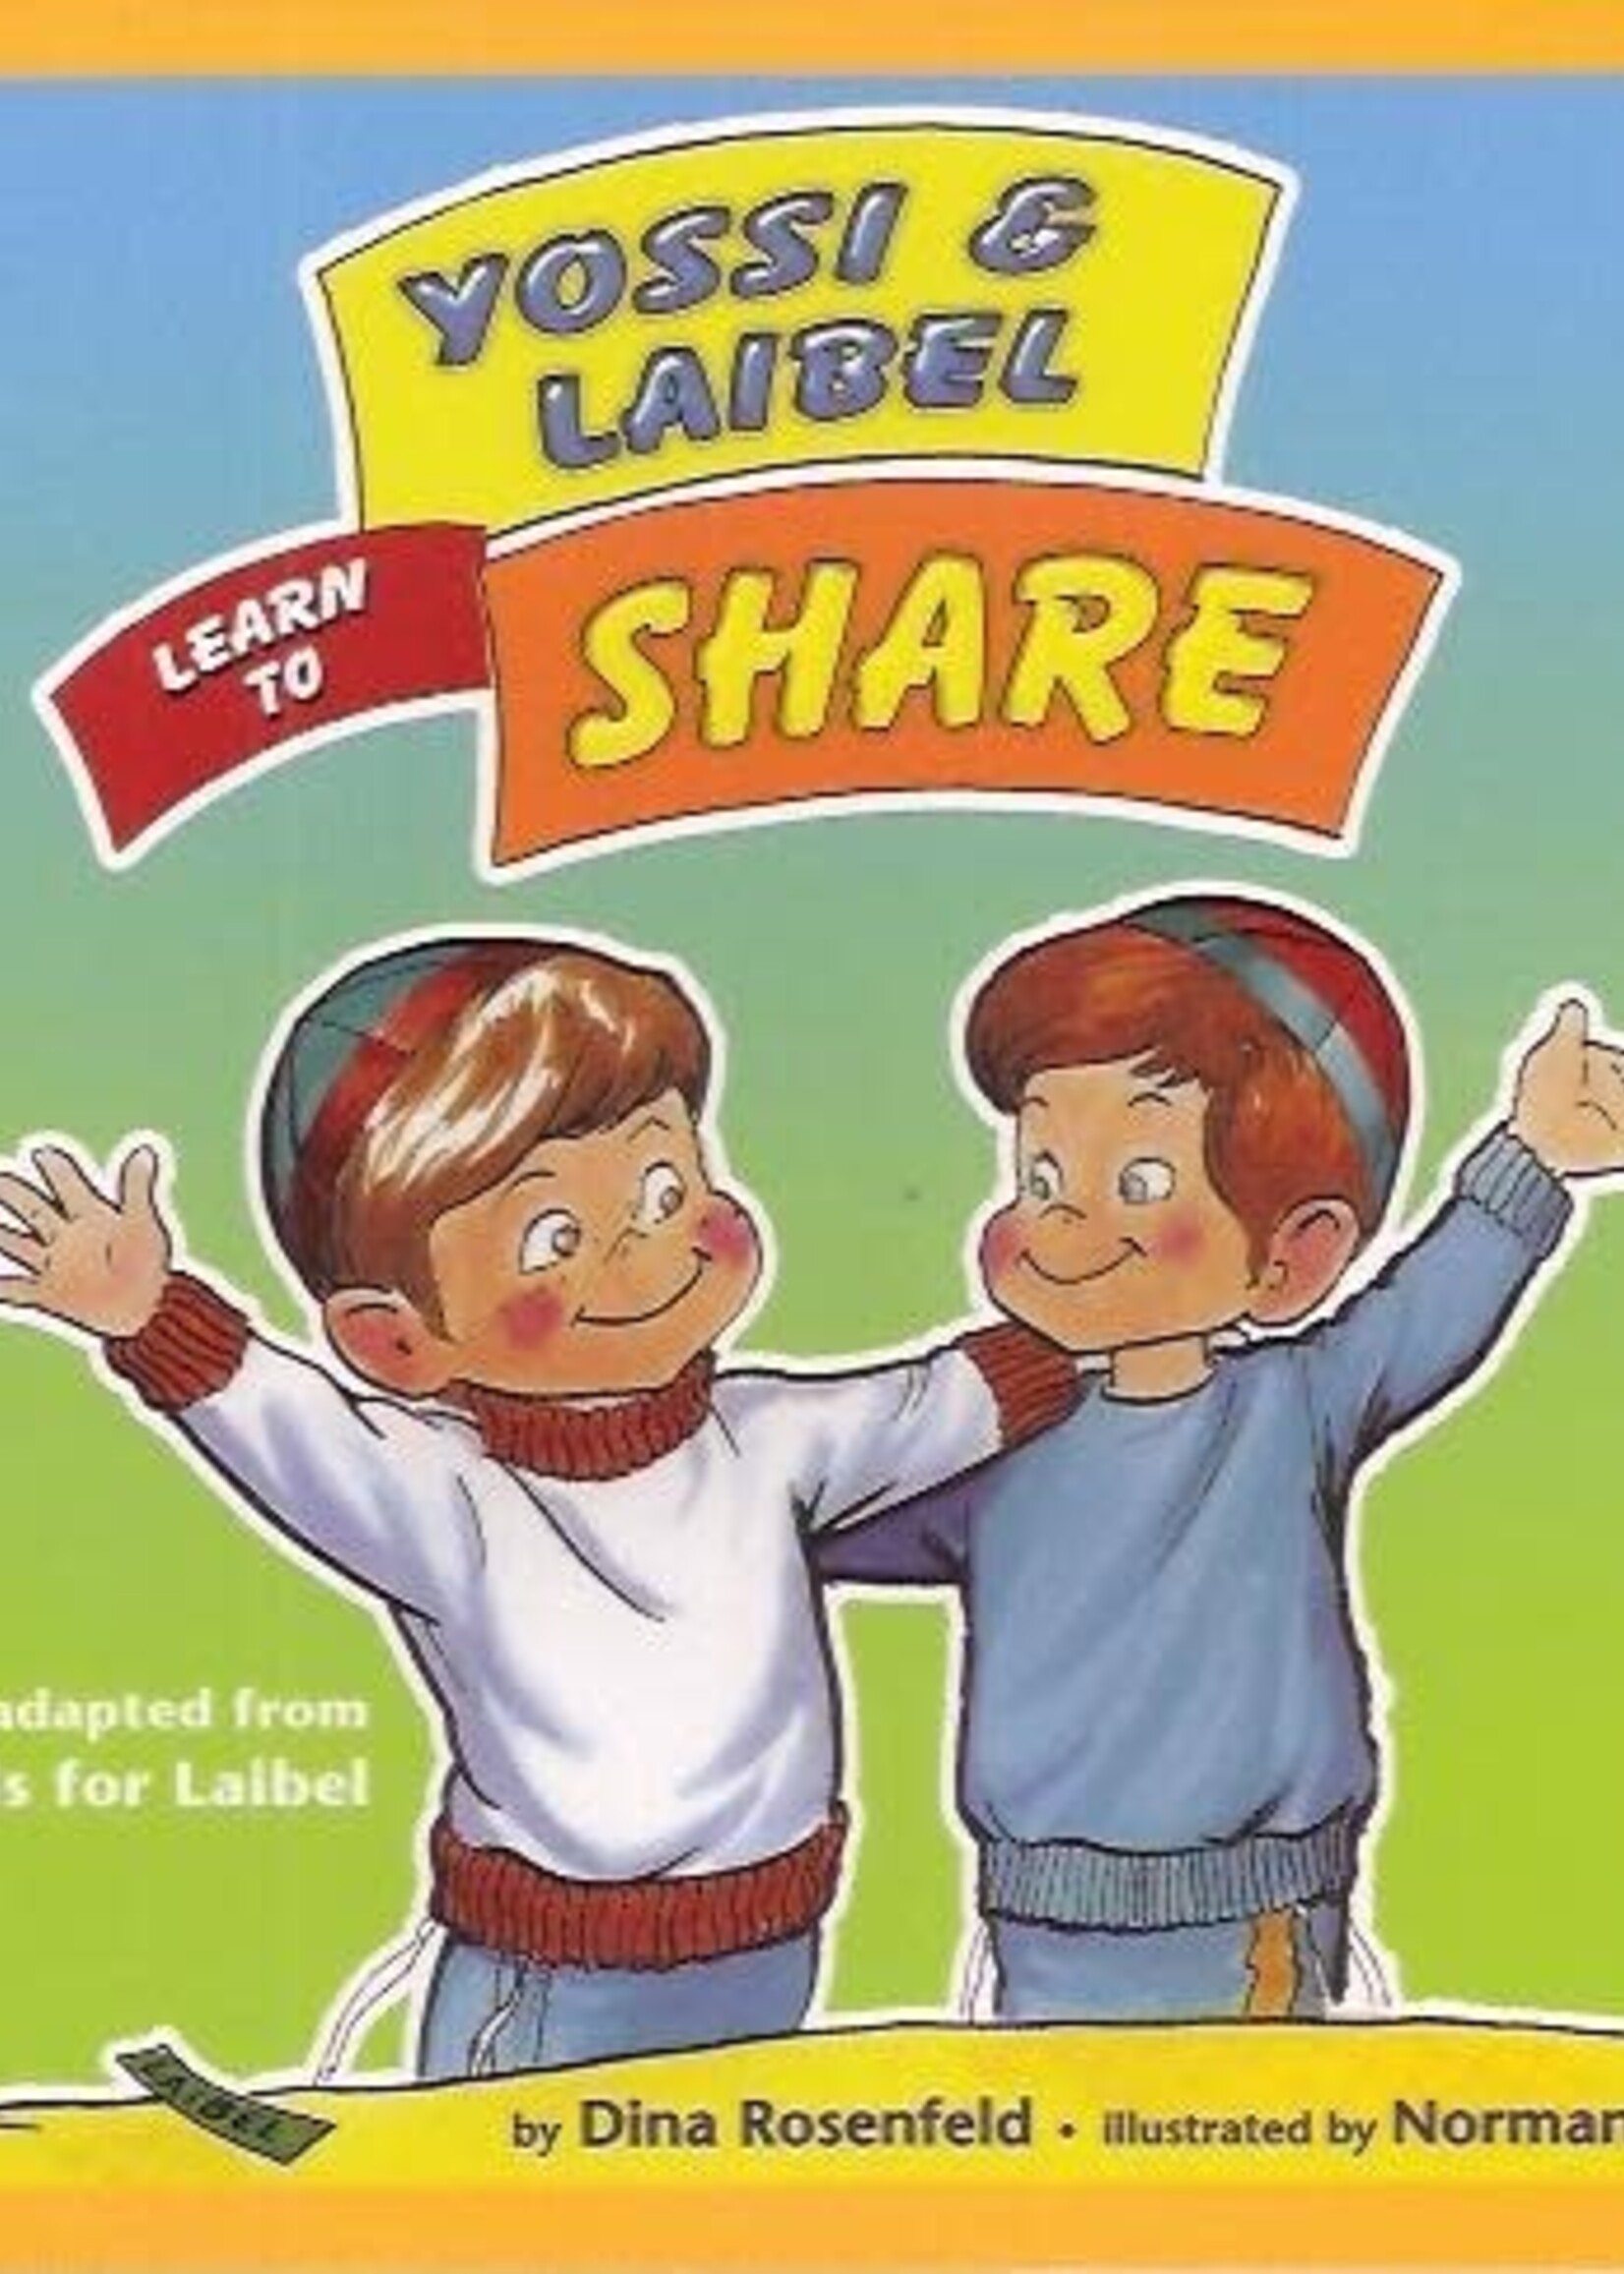 Yossi and Laibel Learn to Share